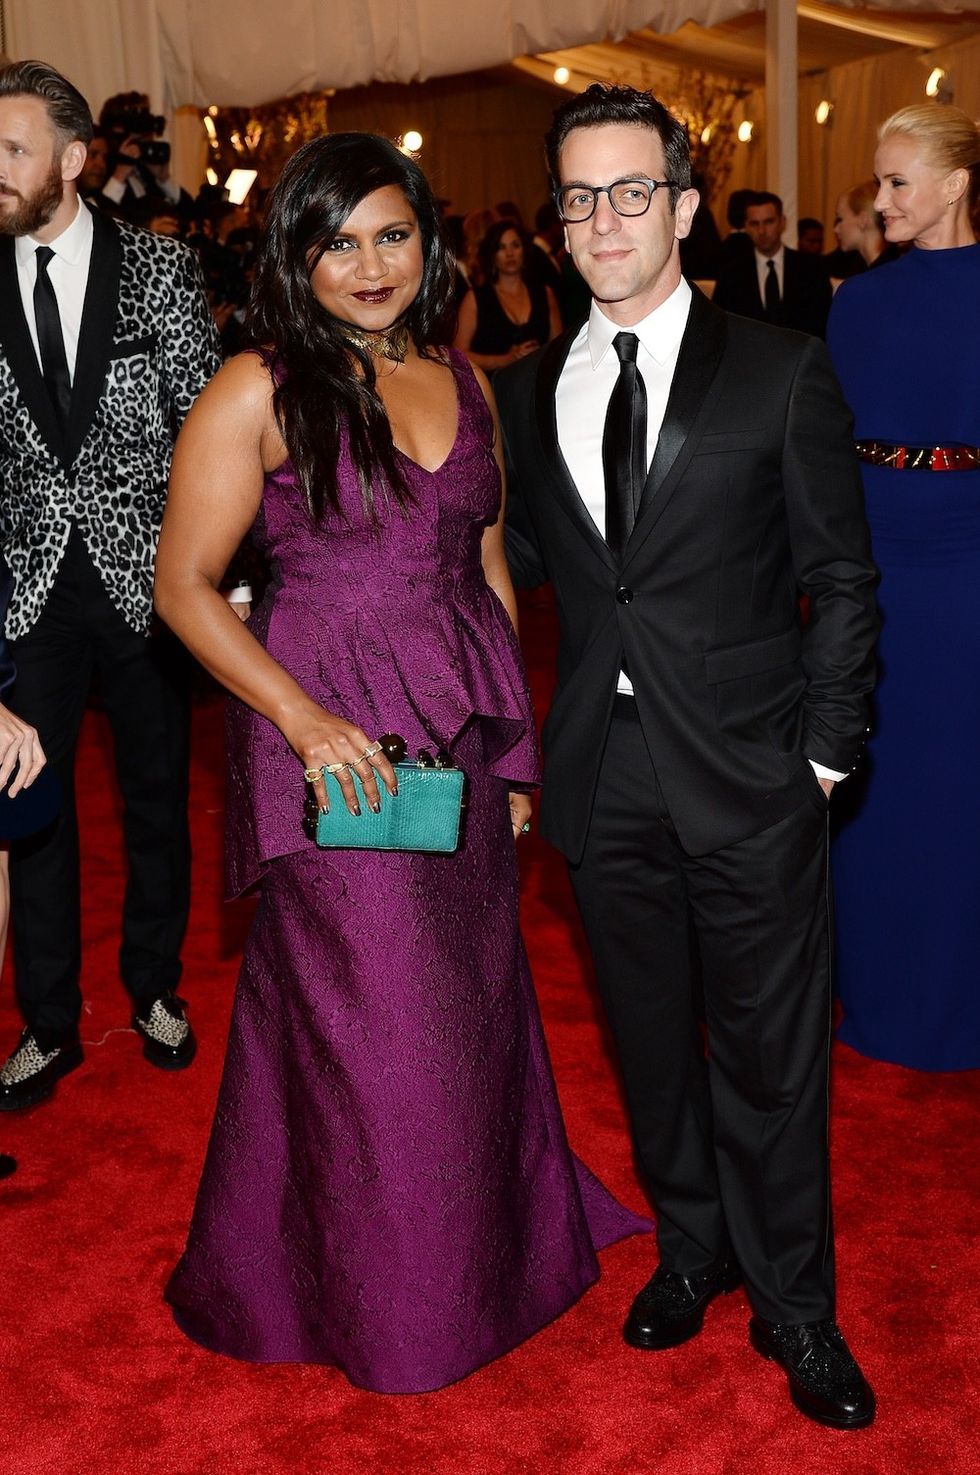 the office stars mindy kaling and bj novak at the met gala in 2013